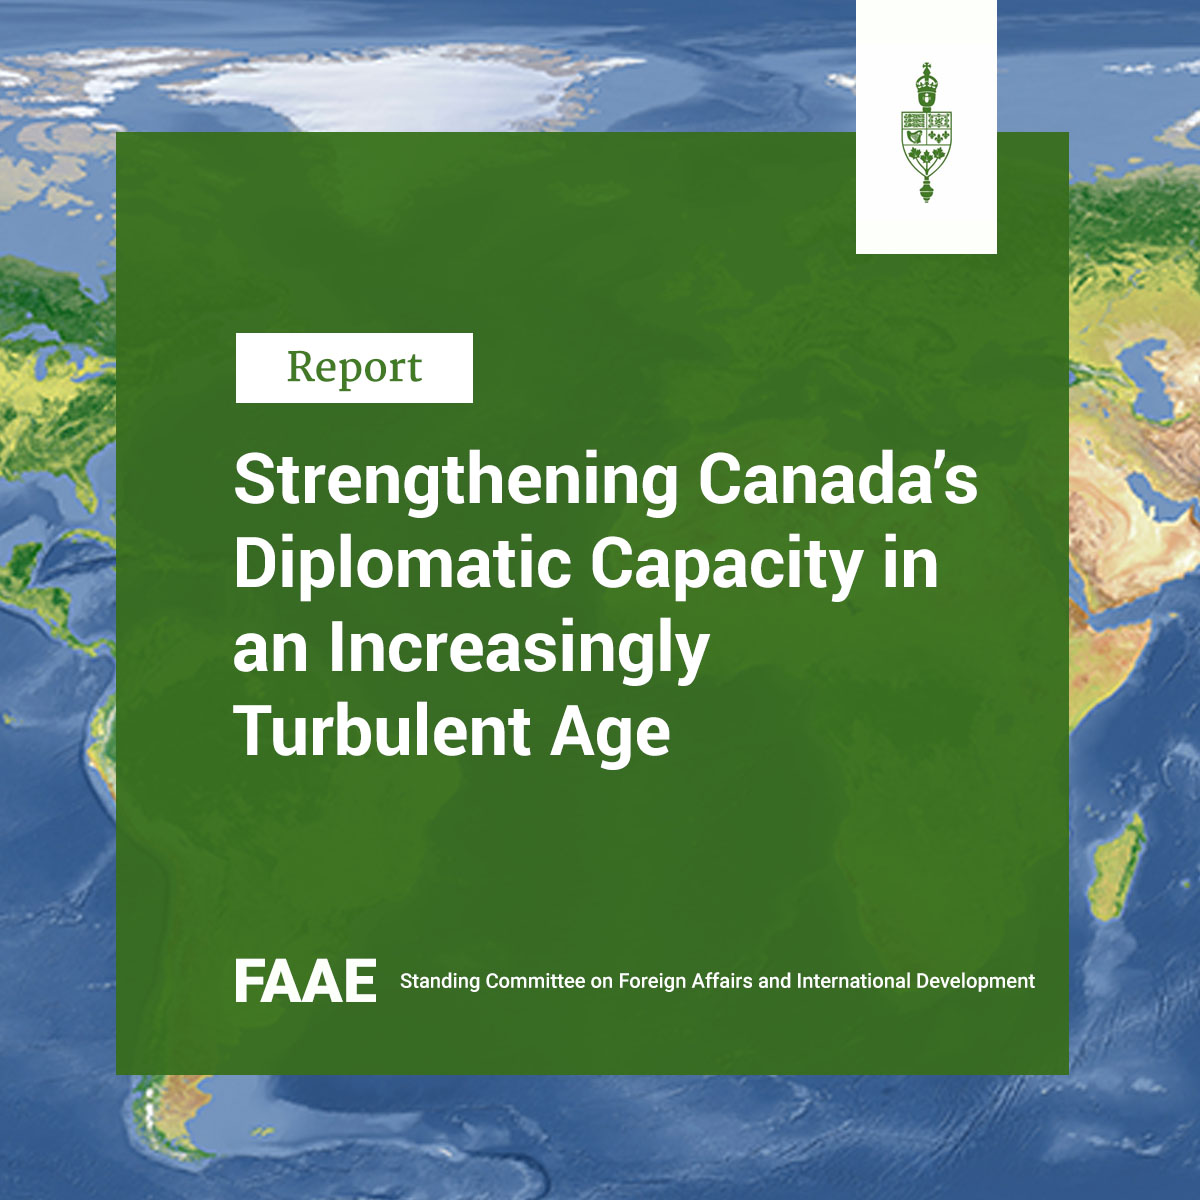 Report 25 from #FAAE, now available: ow.ly/zeti50Rr9LH #CdnPoli